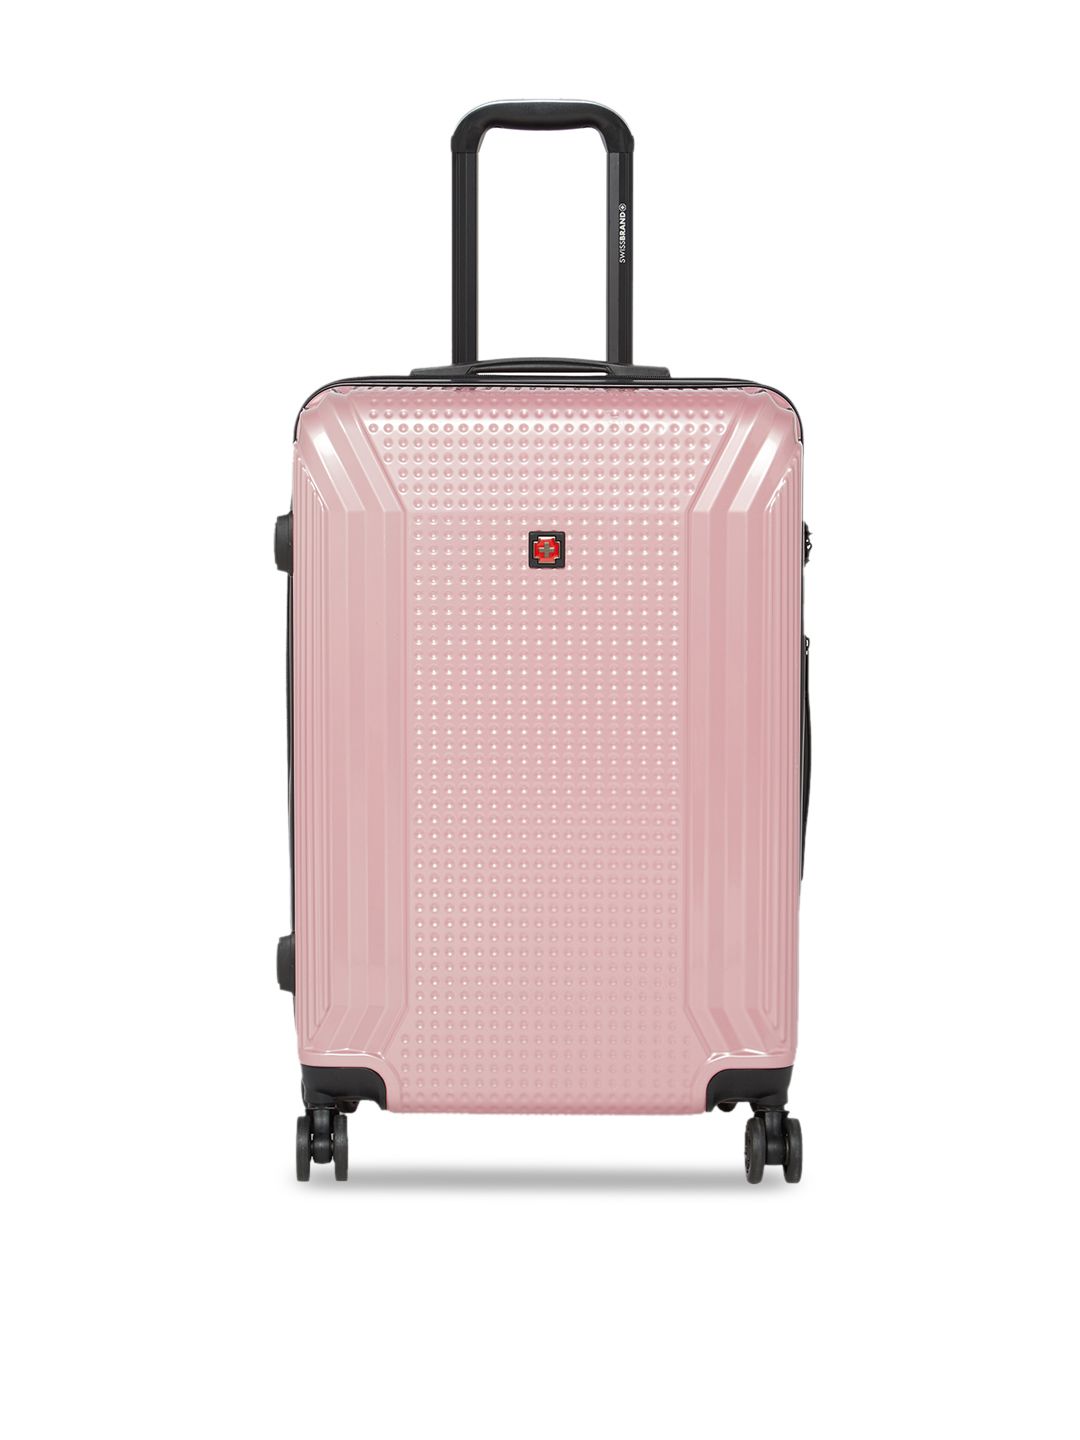 SWISS BRAND Rose Gold-Toned Textured VERNIER Hard-Sided Medium Trolley Suitcase Price in India